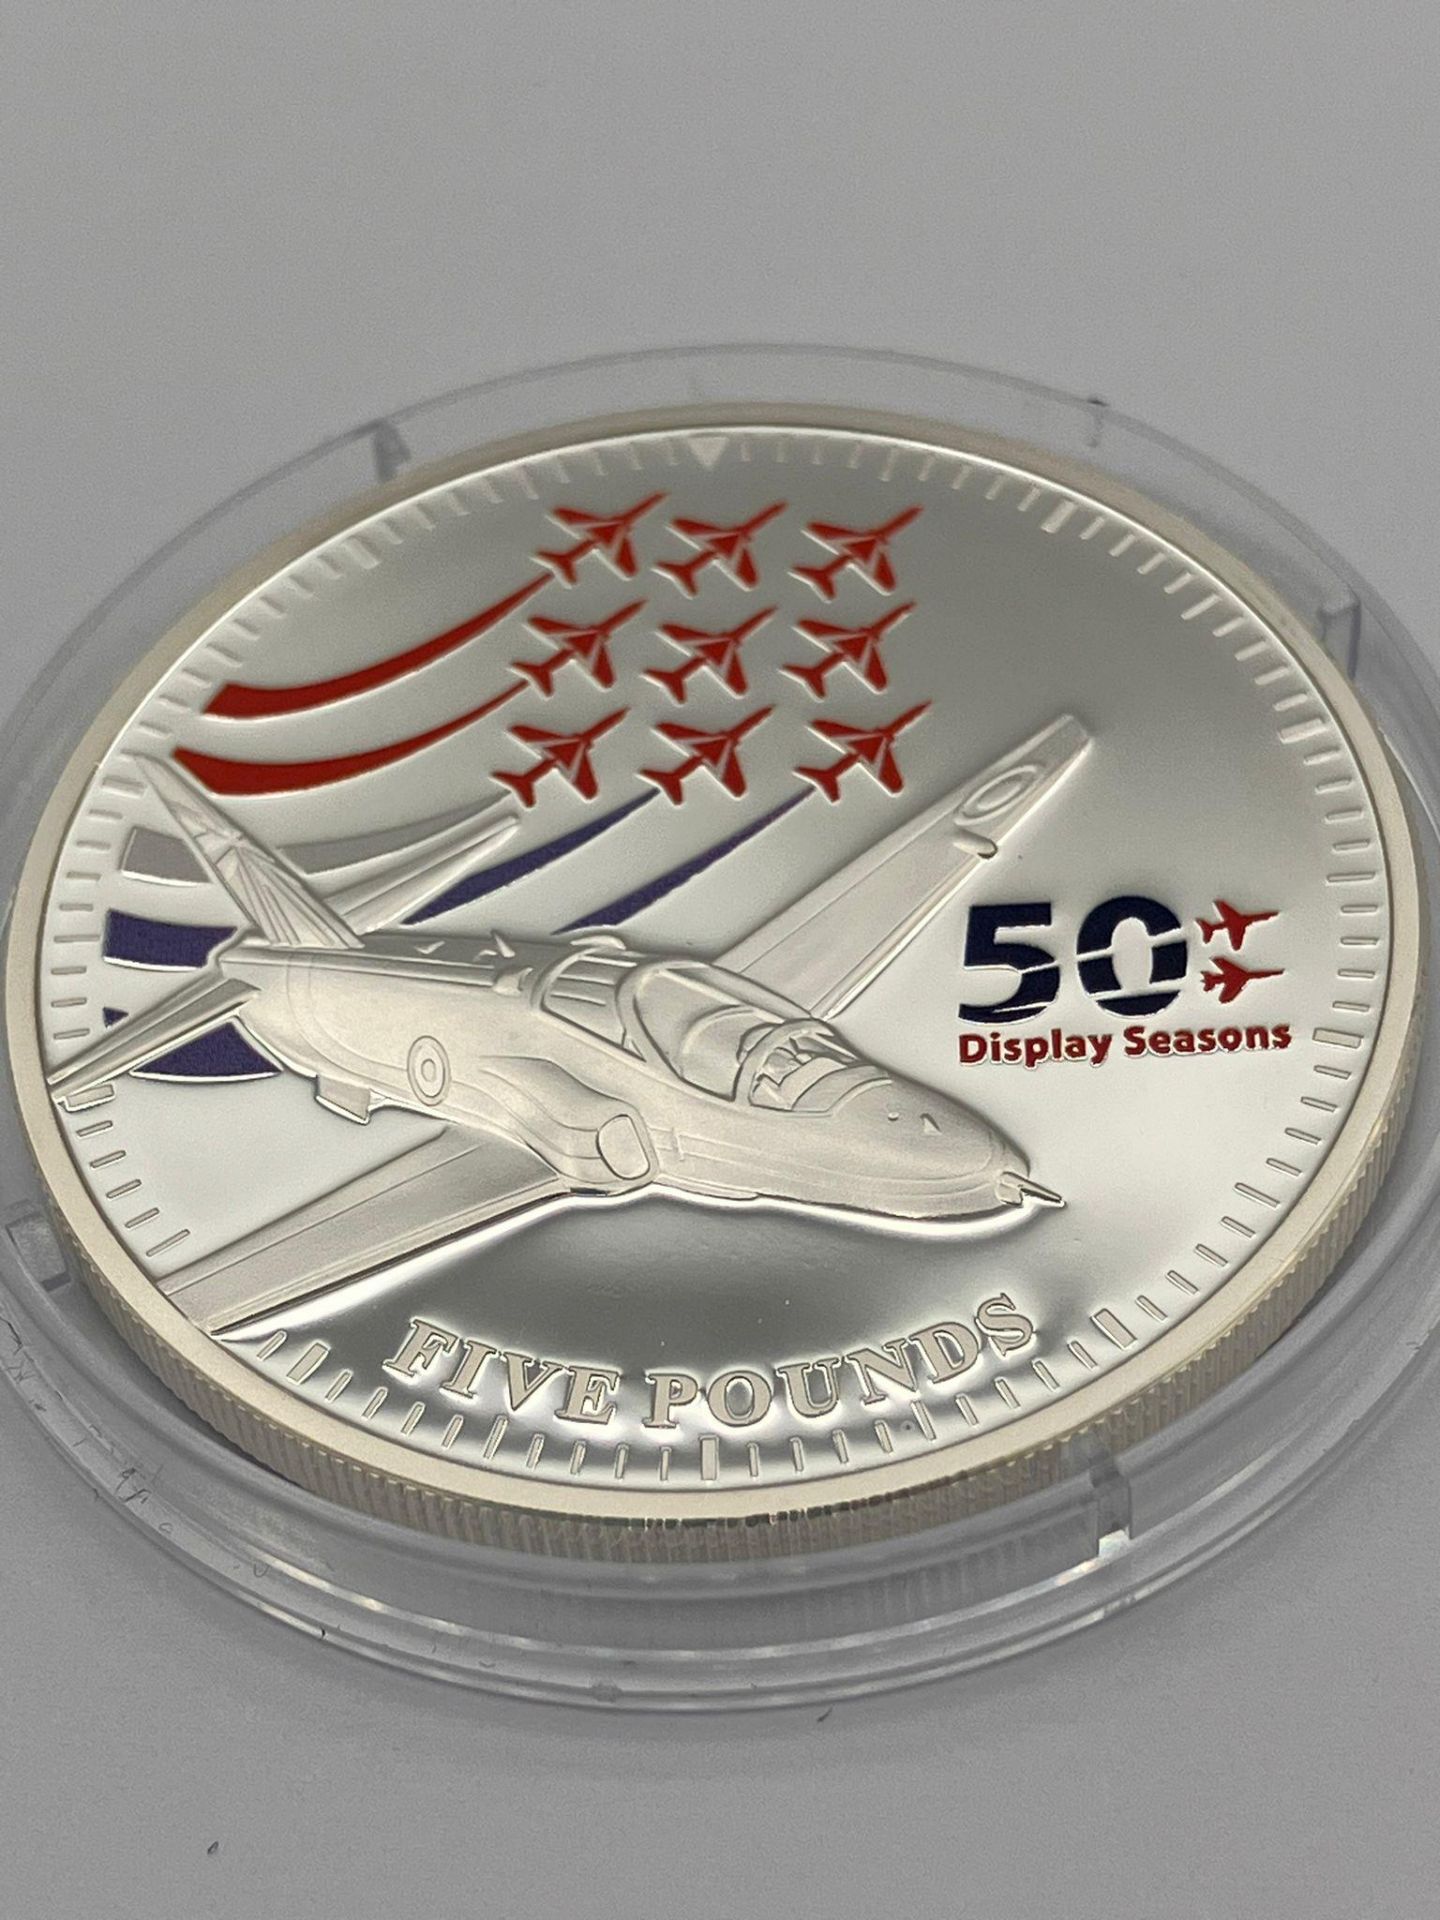 SILVER PROOF FIVE POUND COIN Minted in 2014 to celebrate 50 years of the RAF RED ARROWS TEAM.